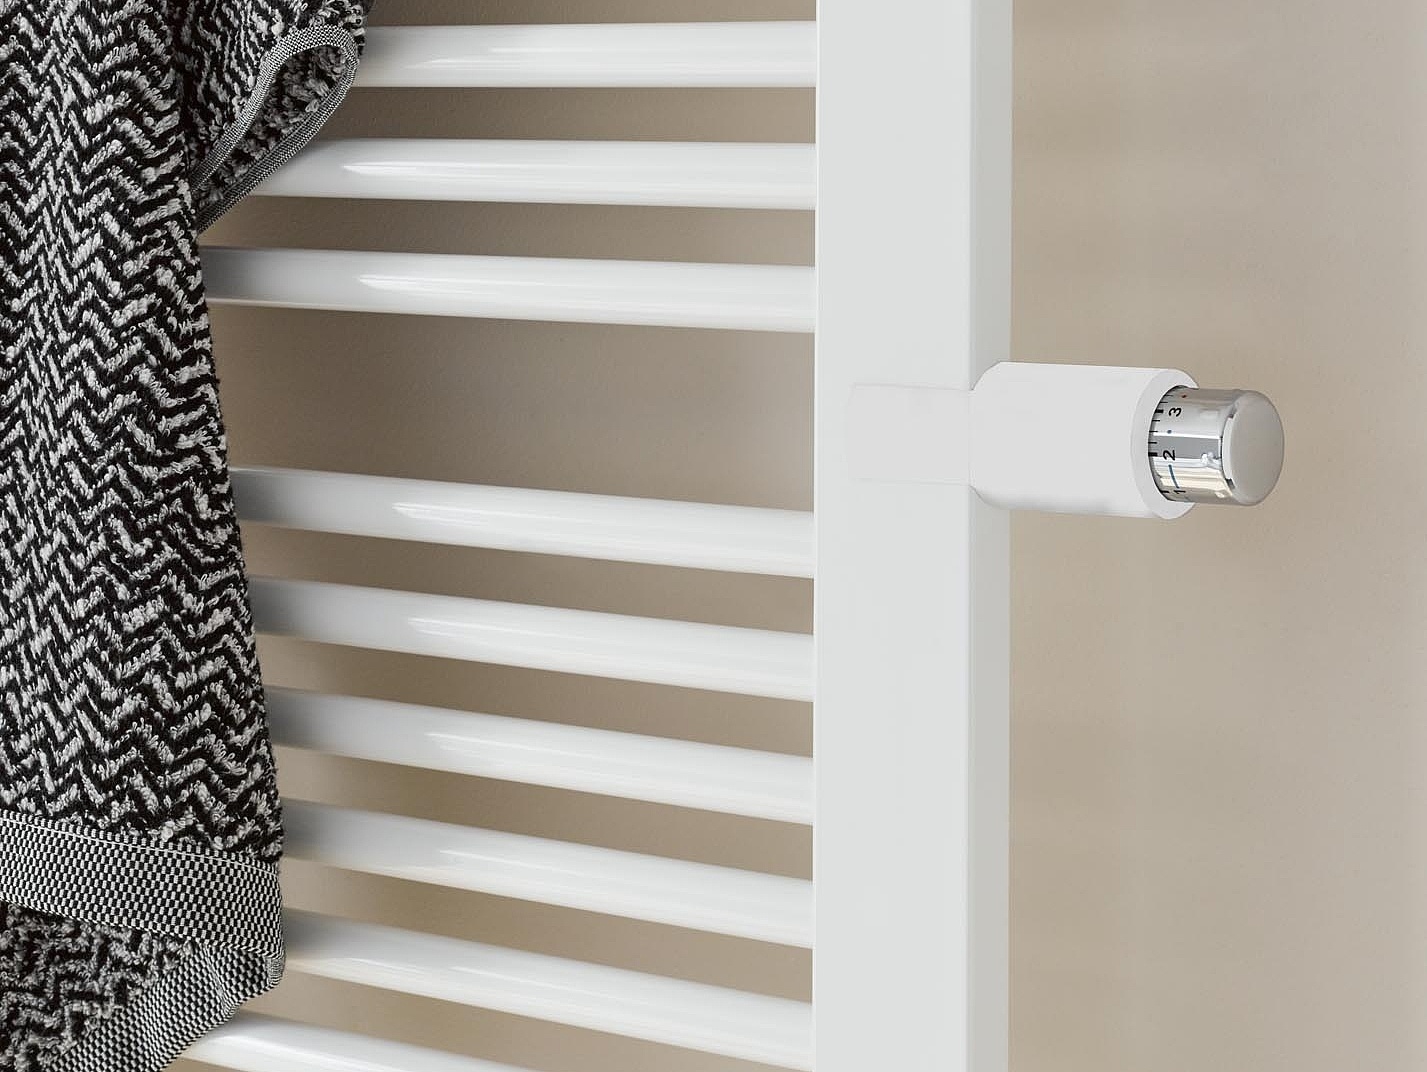 The perfectly integrated thermostatic sensor head of the Kermi Credo plus design and bathroom radiator is mounted at a user-friendly height.